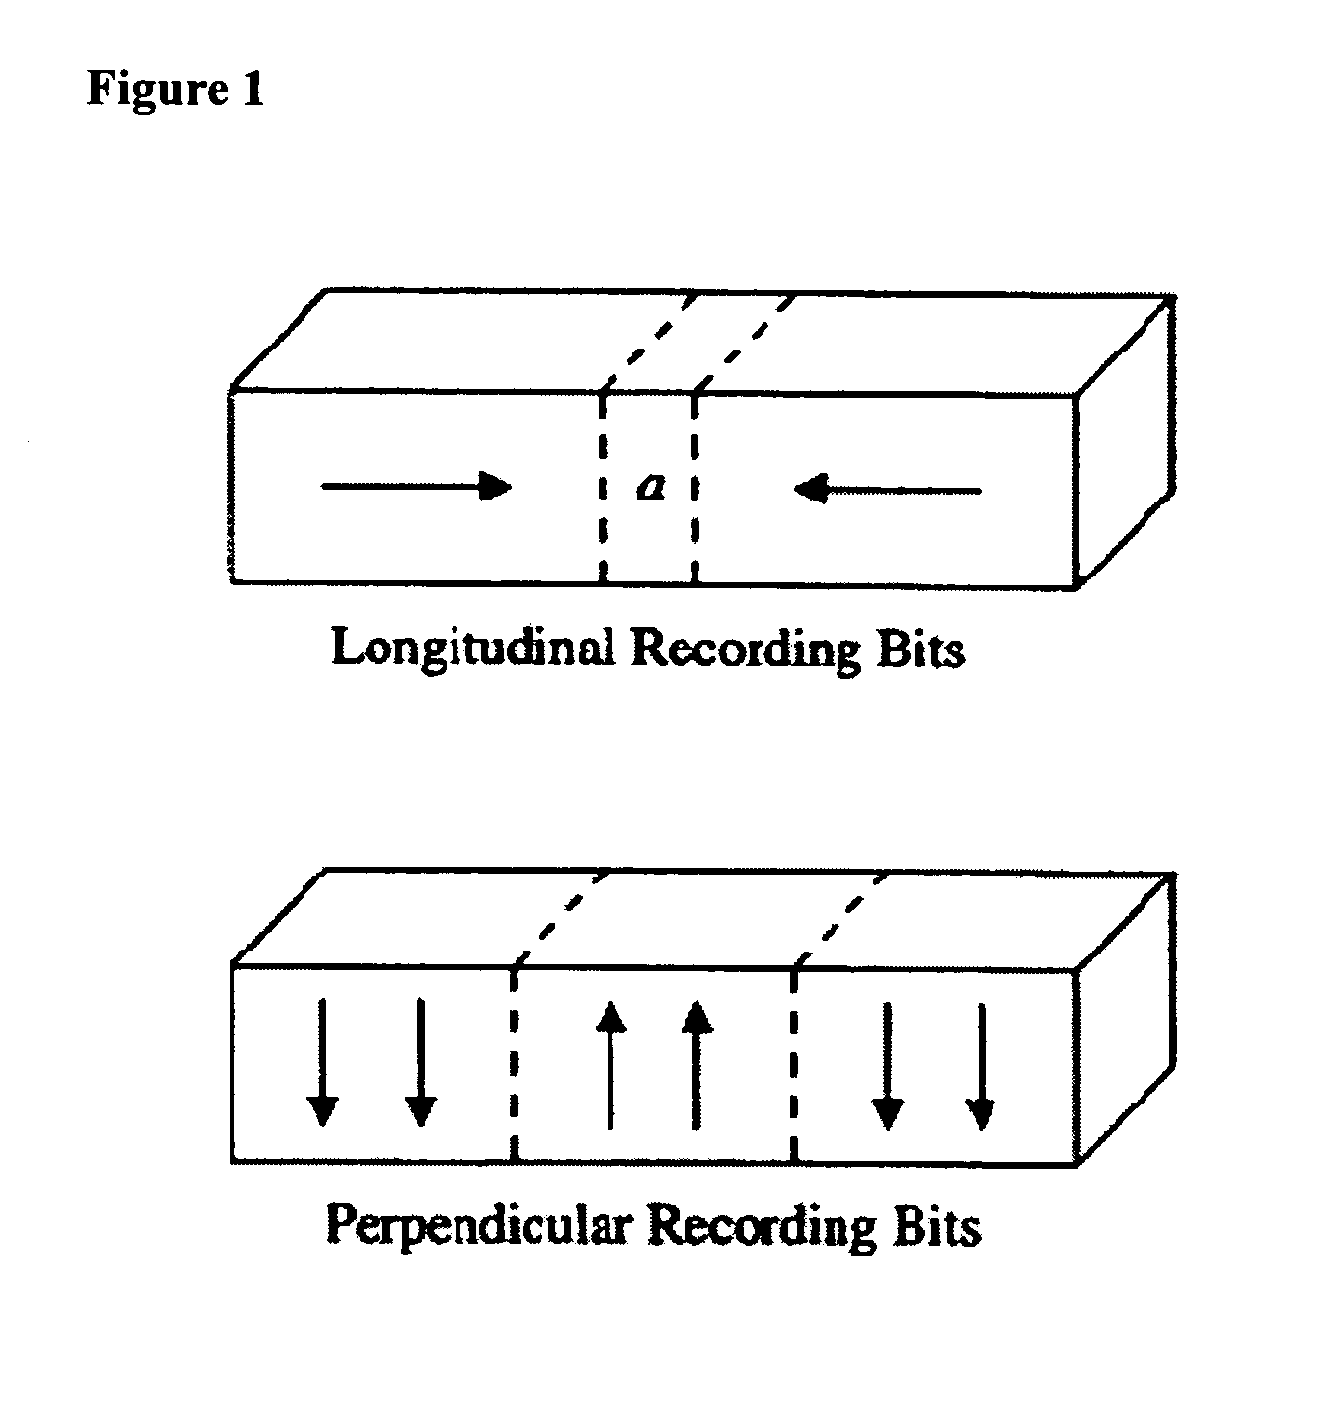 Magnetic storage media with Ag, Au-containing magnetic layers